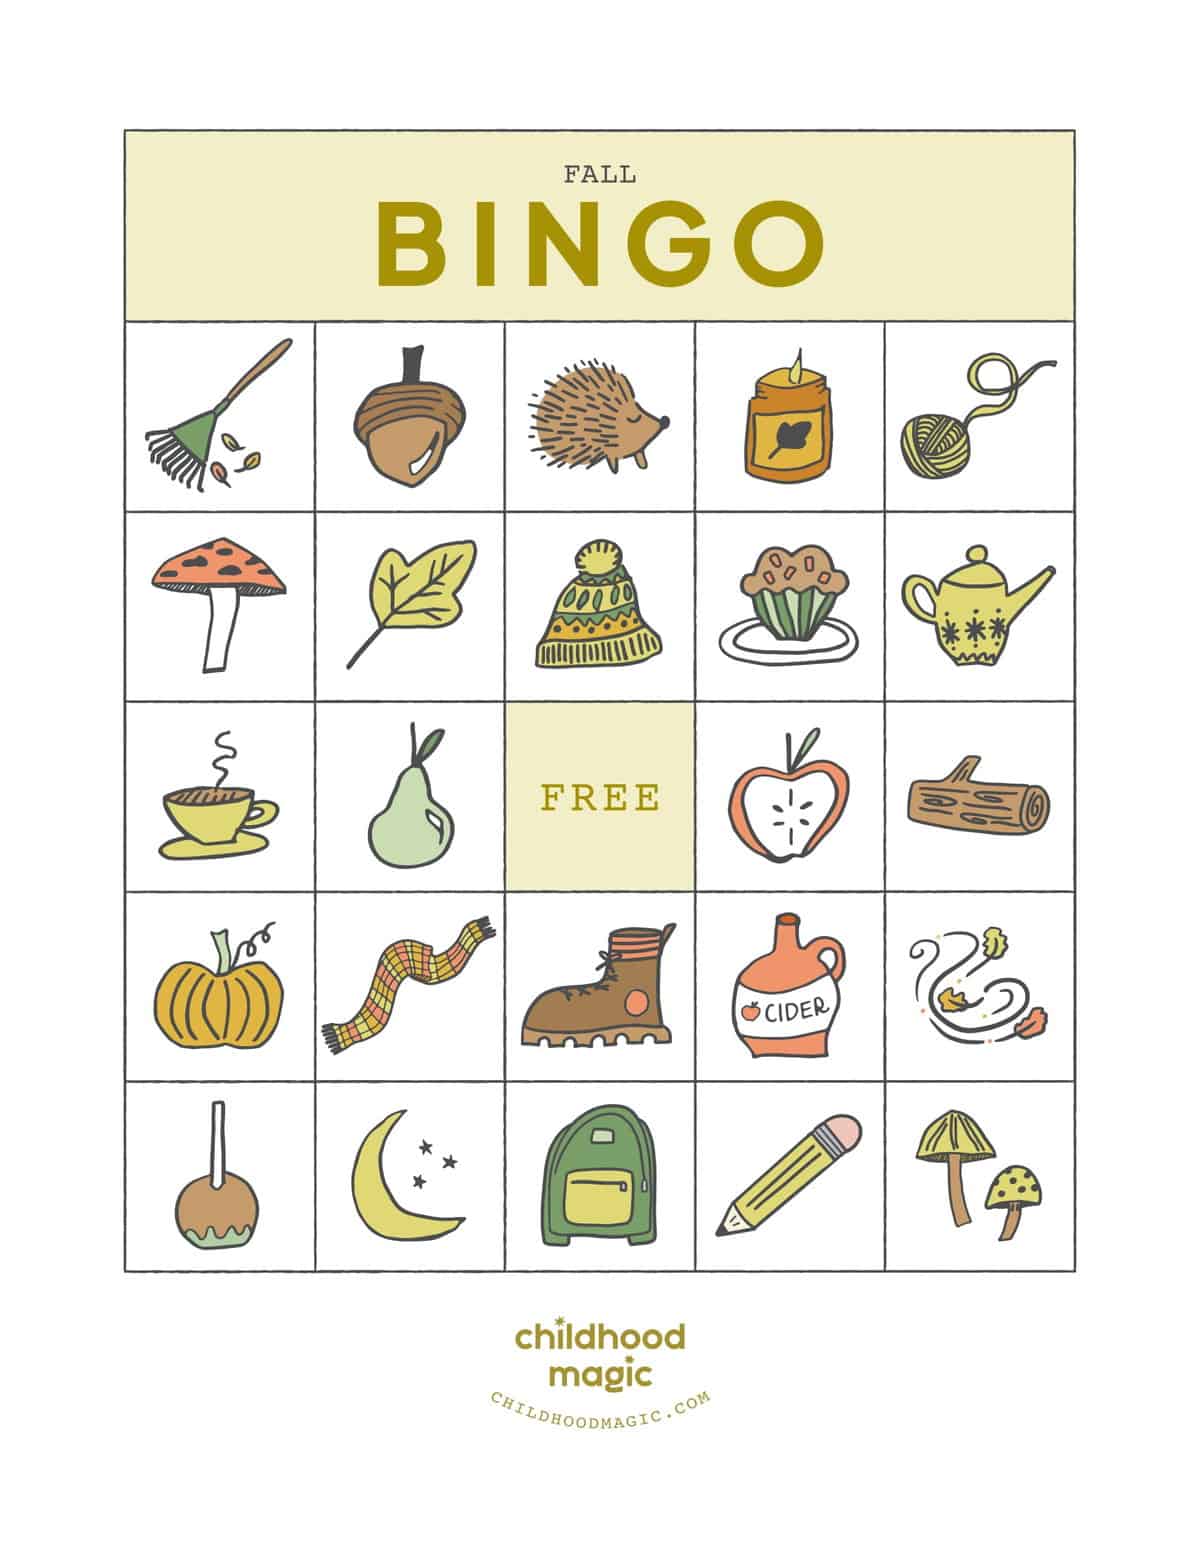 Bingo card with fall-themed icons. 